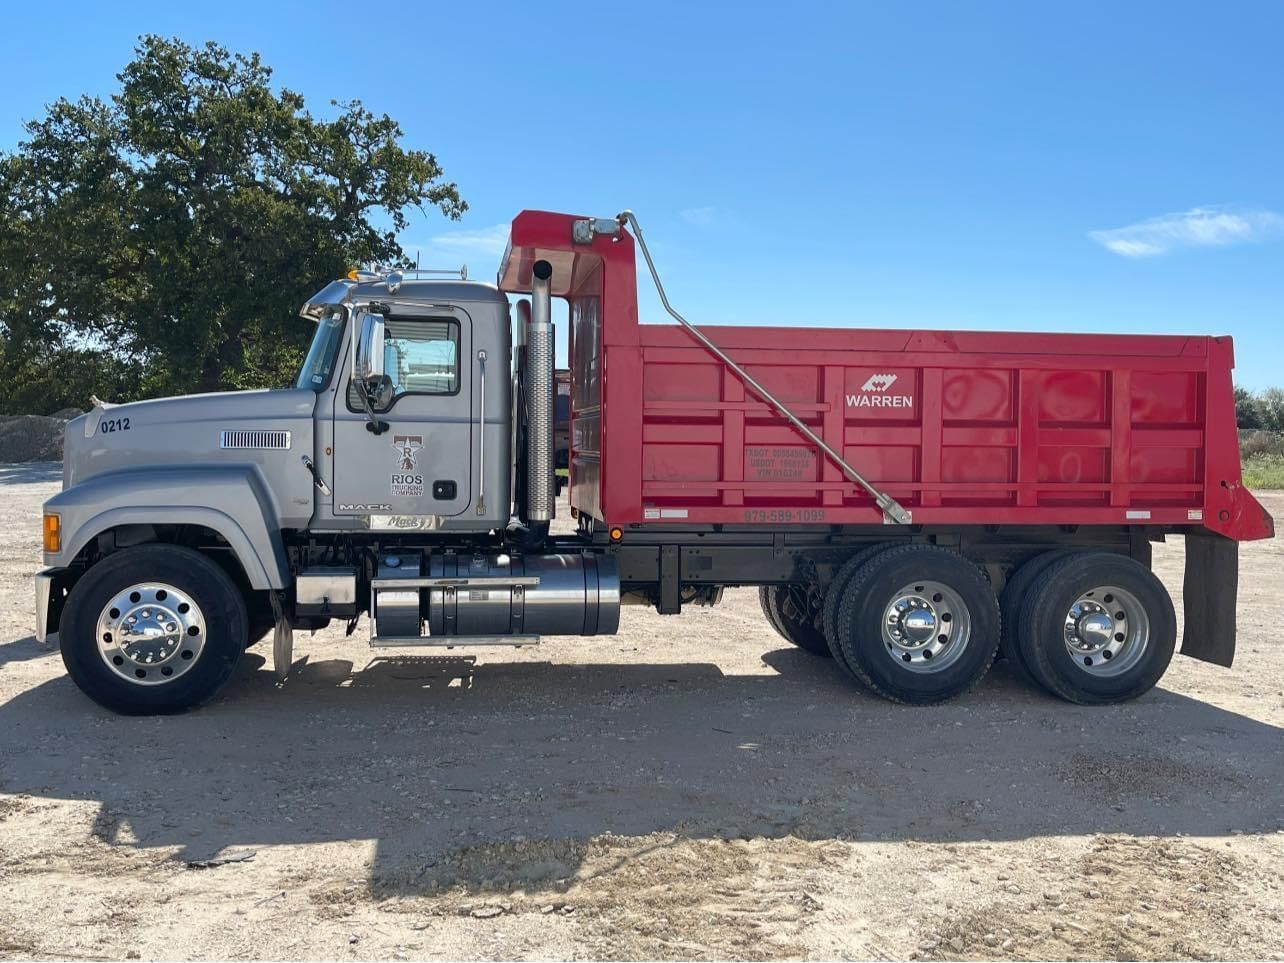 Rios Trucking Co., hauling, haul-off services, landscape materials and supplies delivery dump truck